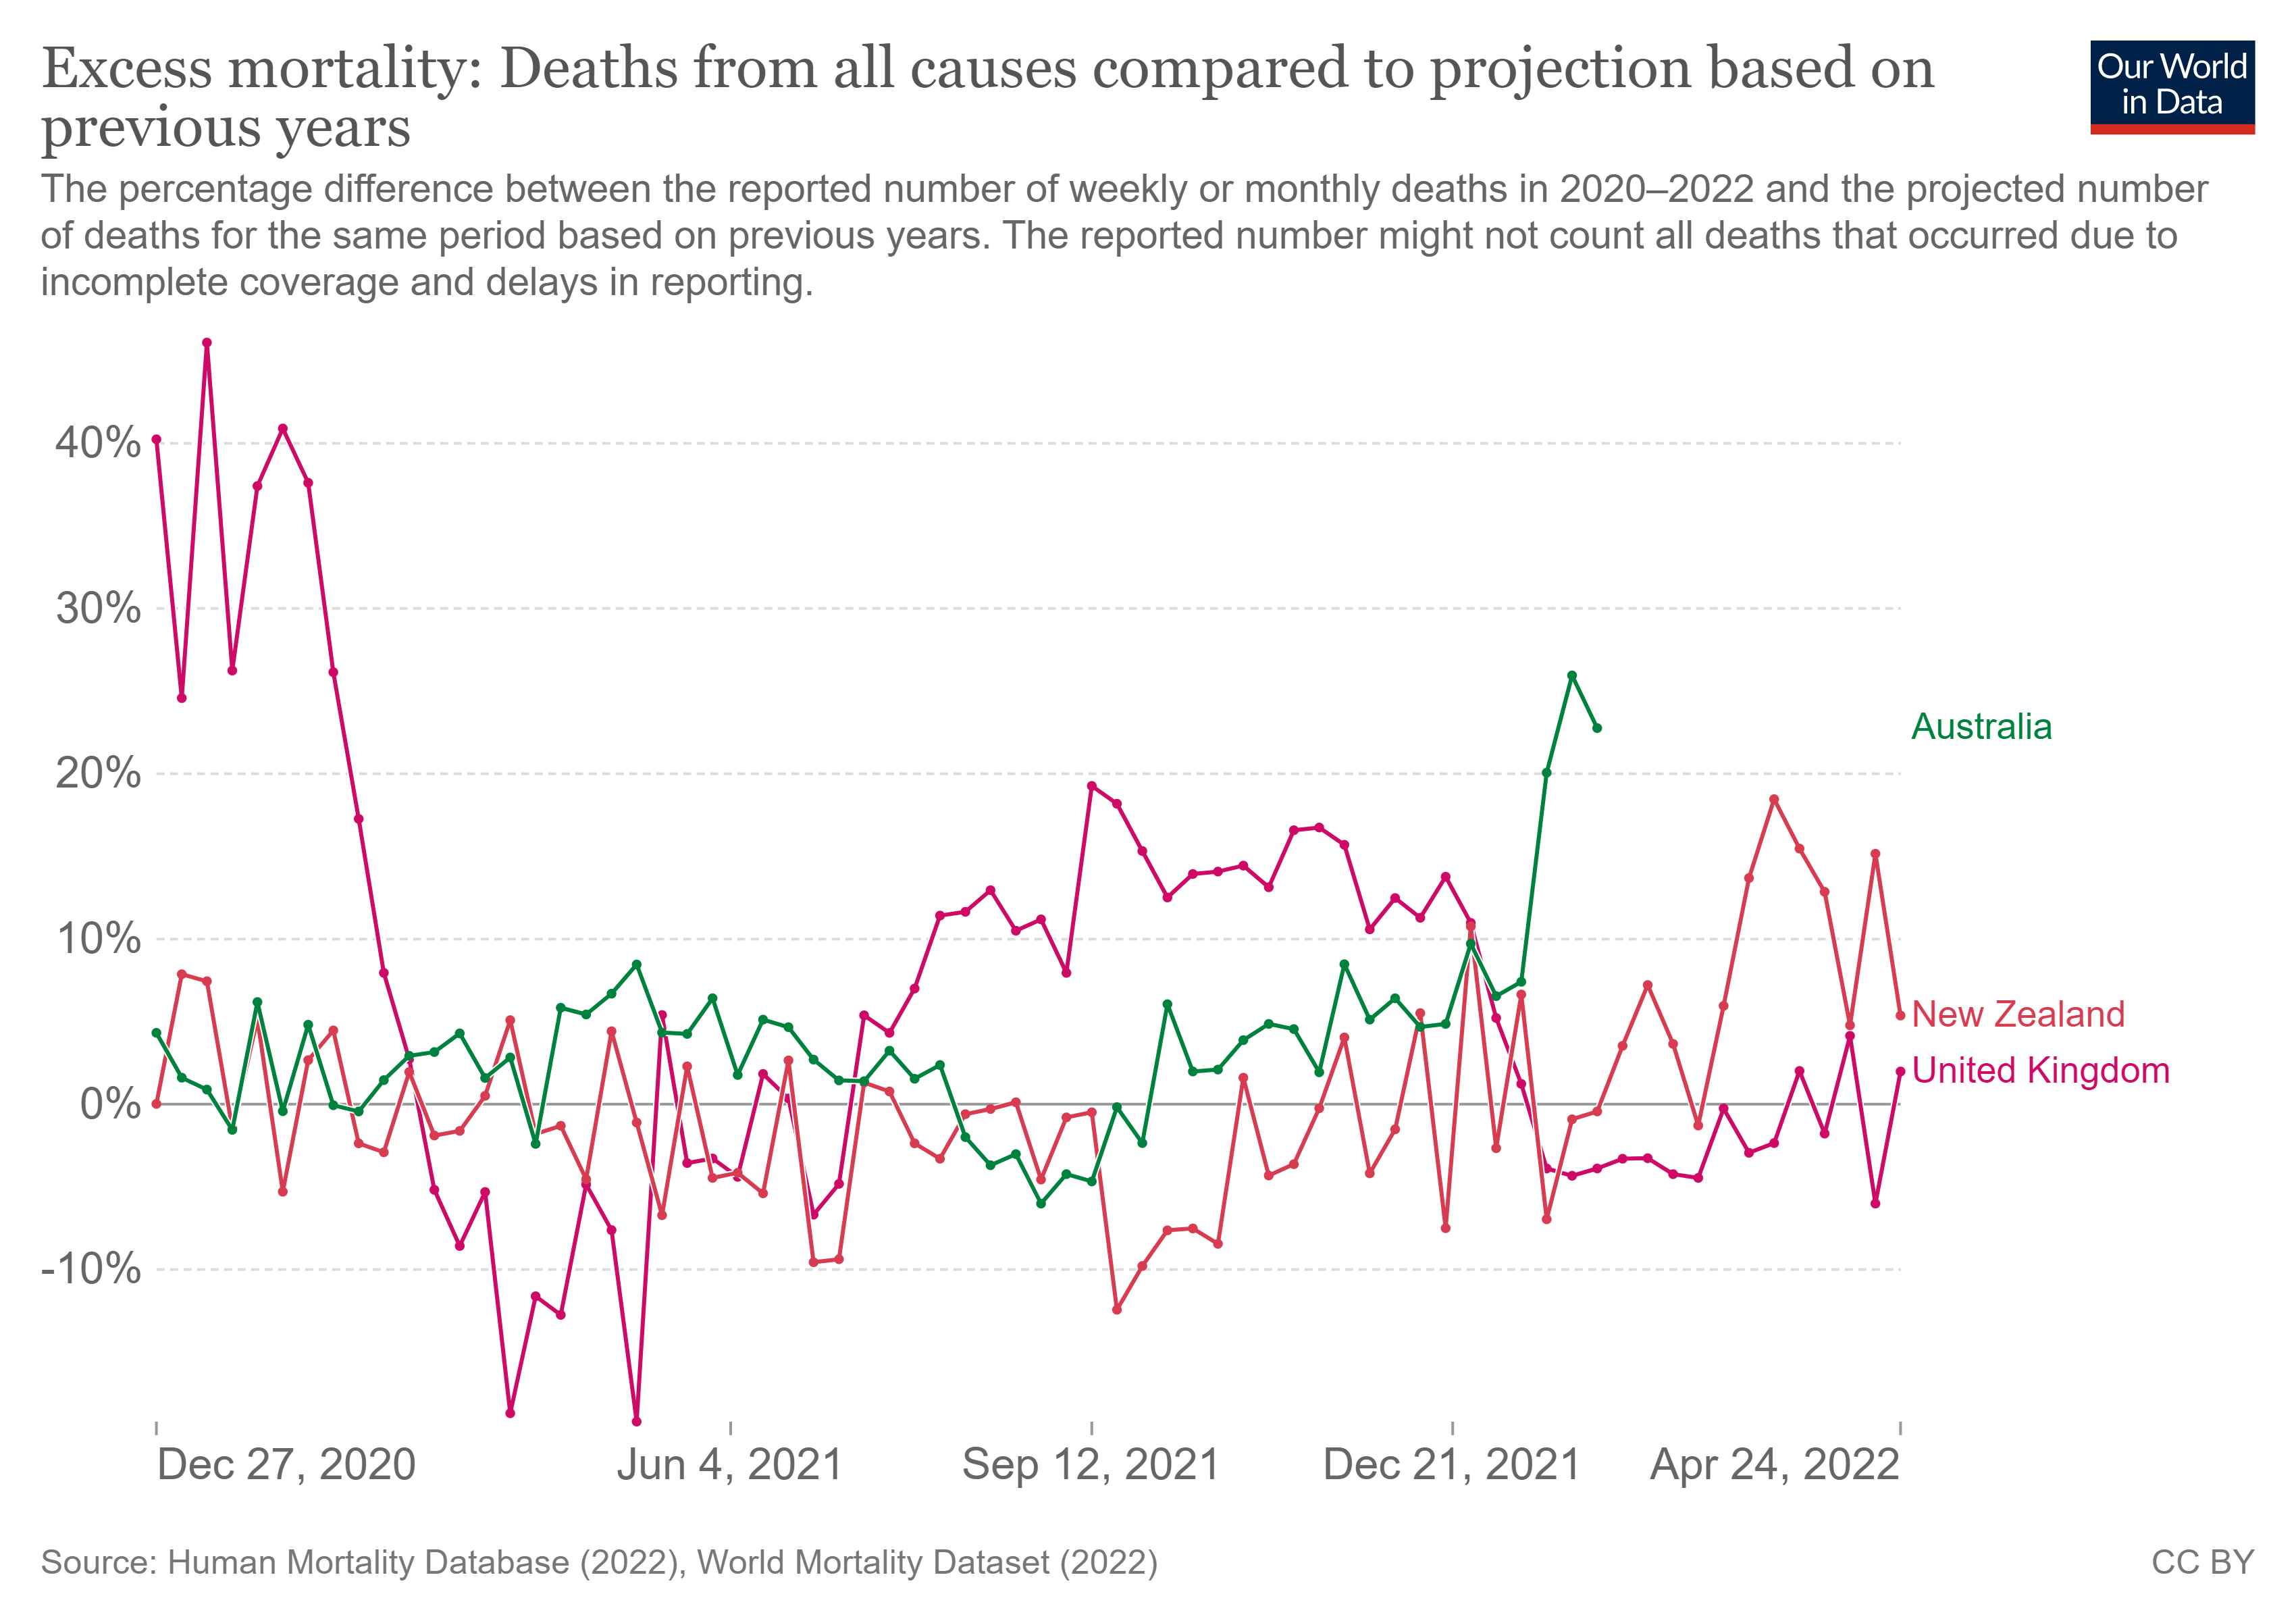 Why does Australia have so many excess deaths and why did it stop reporting excess deaths?